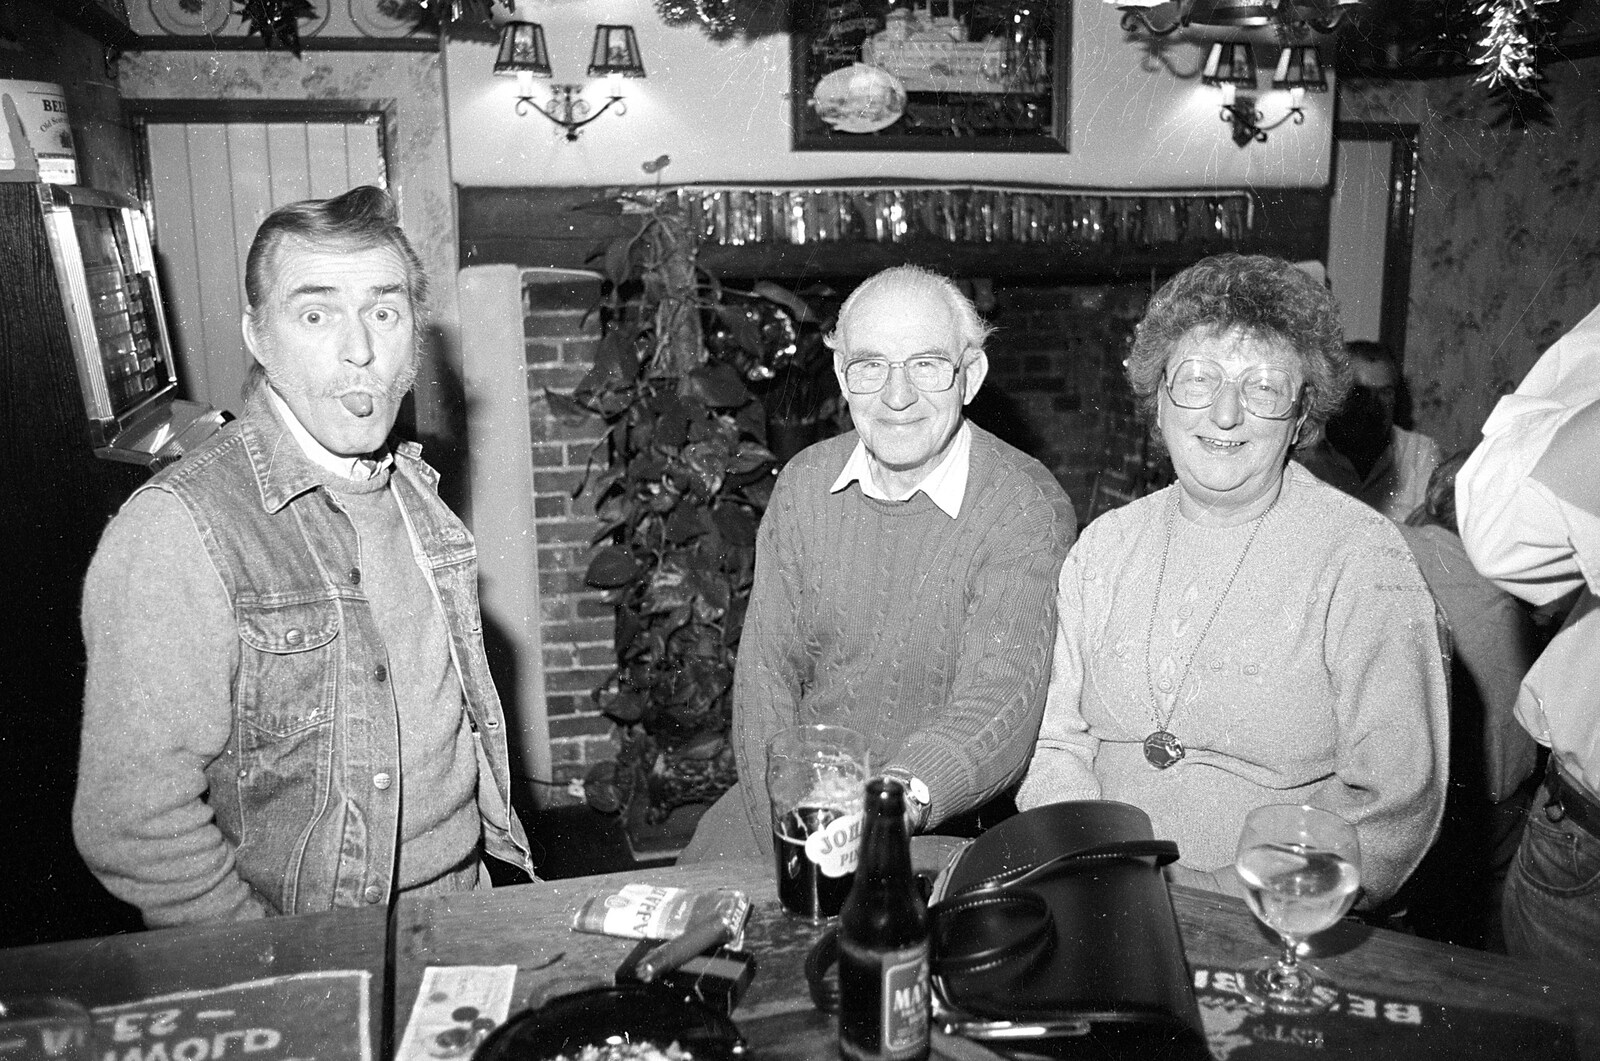 Tony 't-shirt' Guy sticks his tongue out from New Year's Eve at the Swan Inn, Brome, Suffolk - 31st December 1992